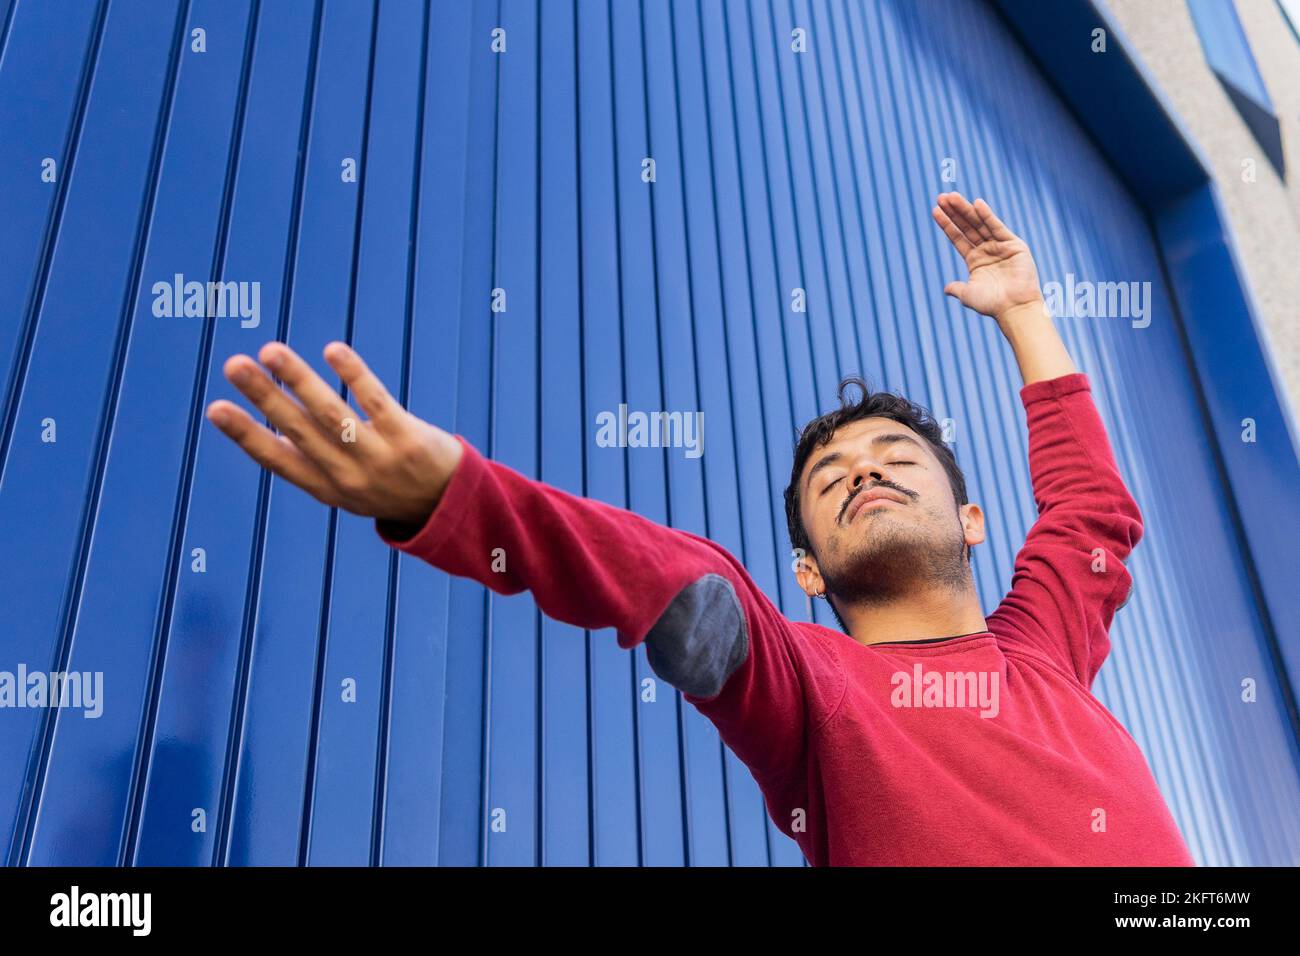 Low angle of male dancer in red sweatshirt performing movement with one hand raised and other outstretched Stock Photo